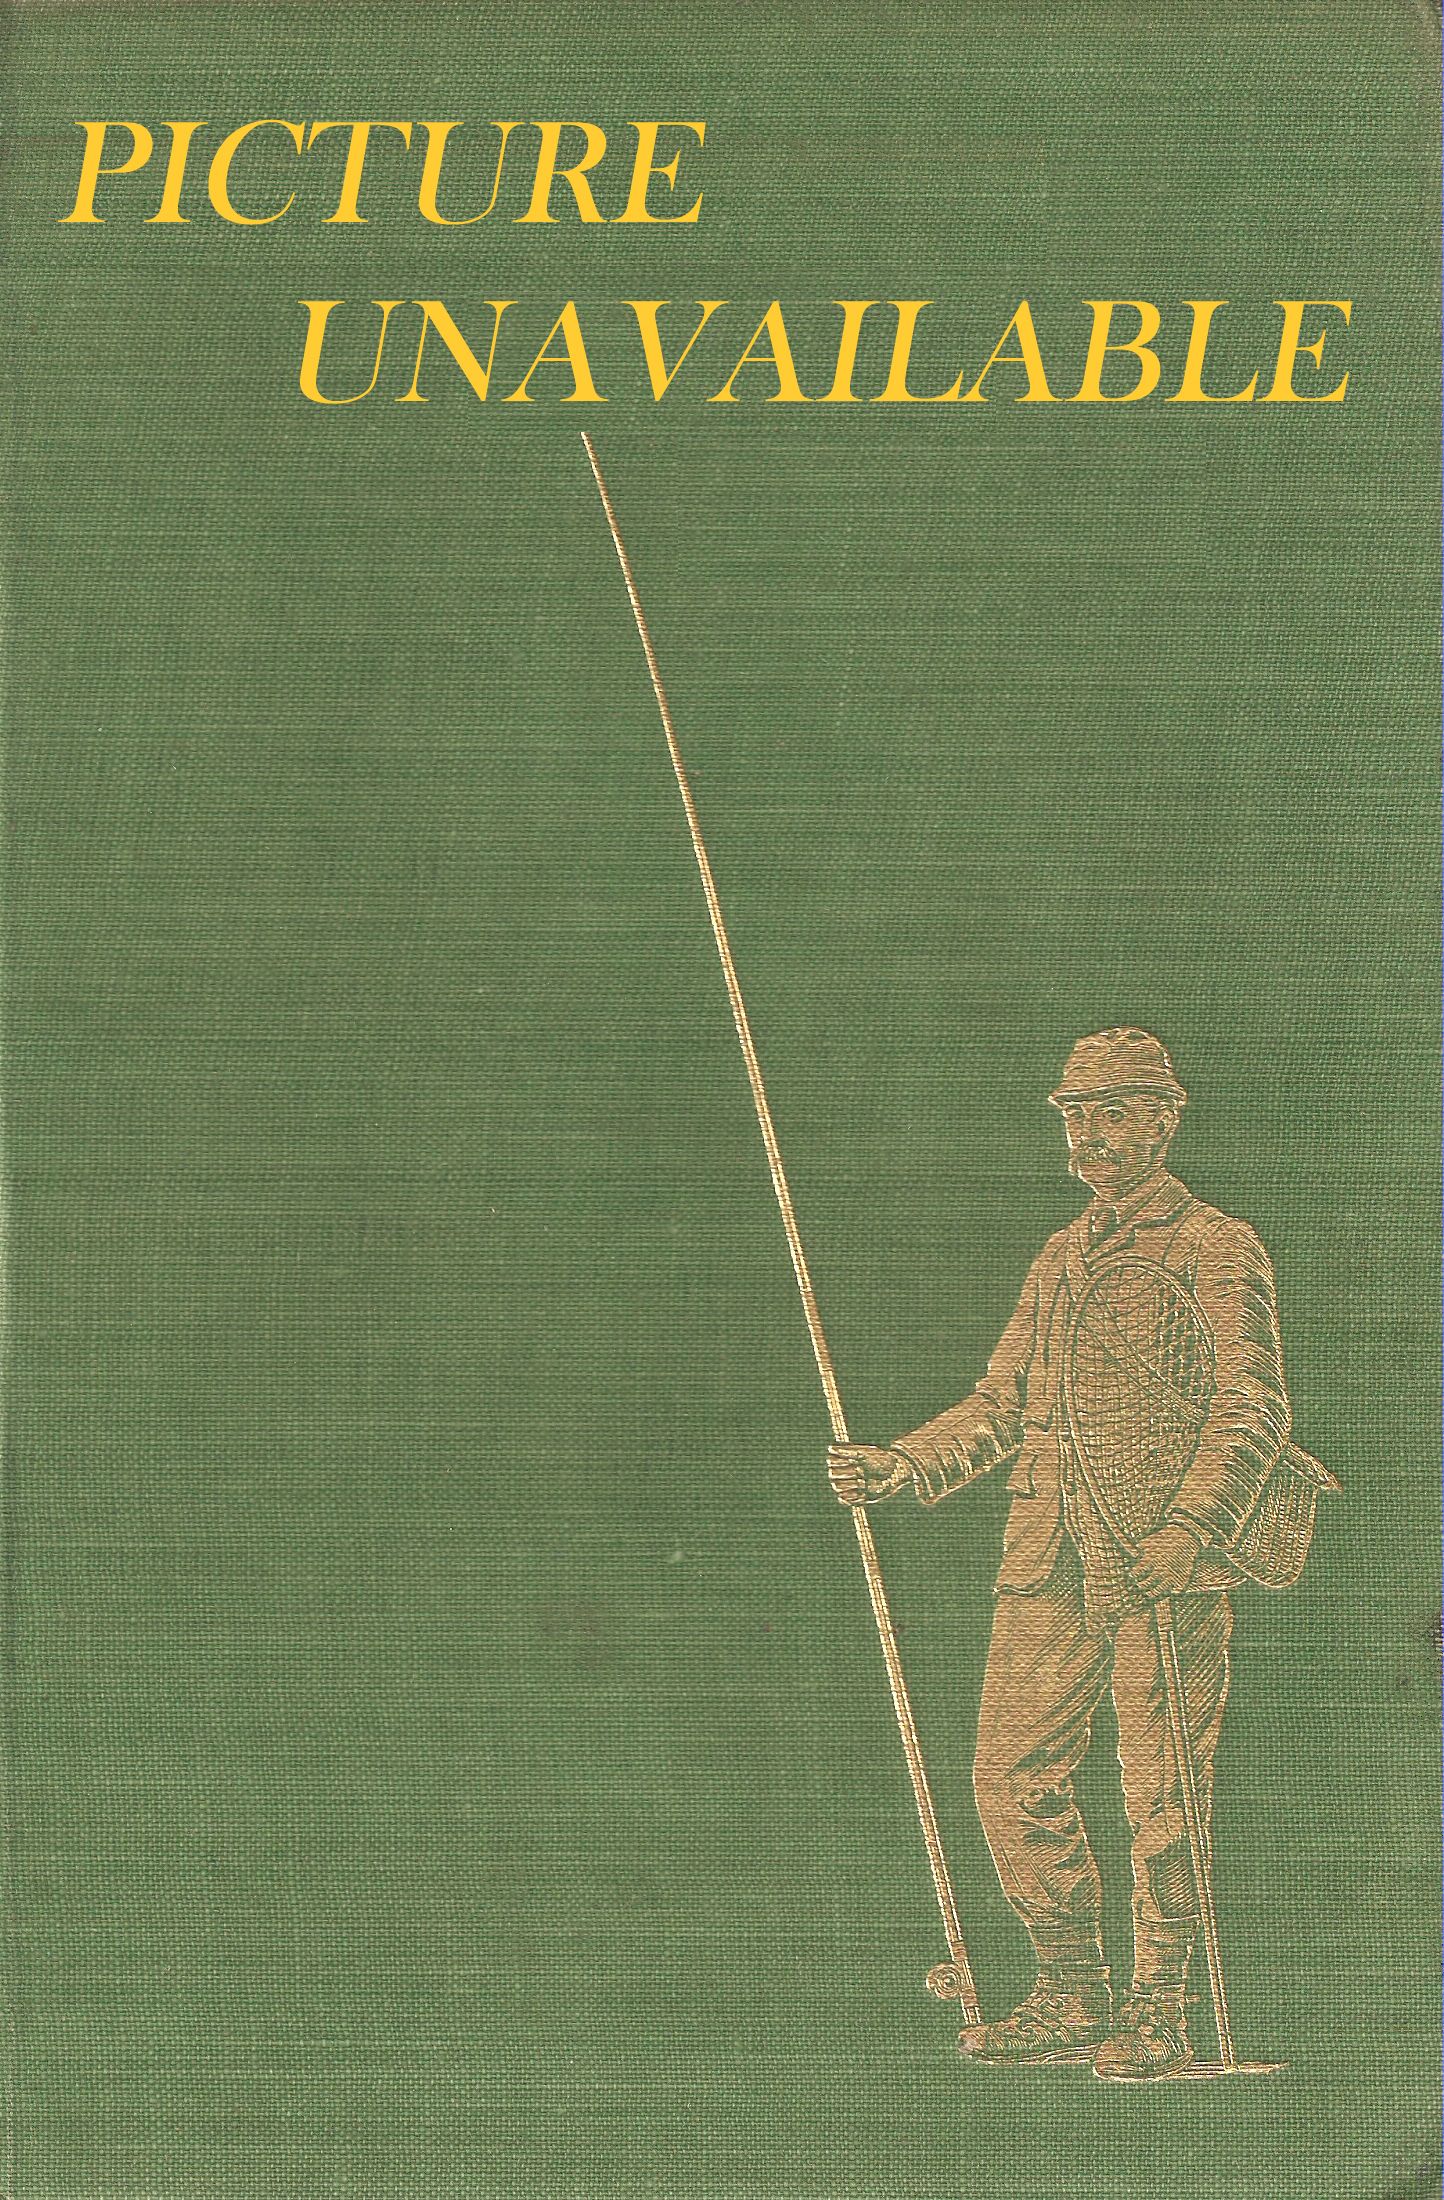 FAMOUS FLIES AND THEIR ORIGINATORS. By T. Donald Overfield. First issue.